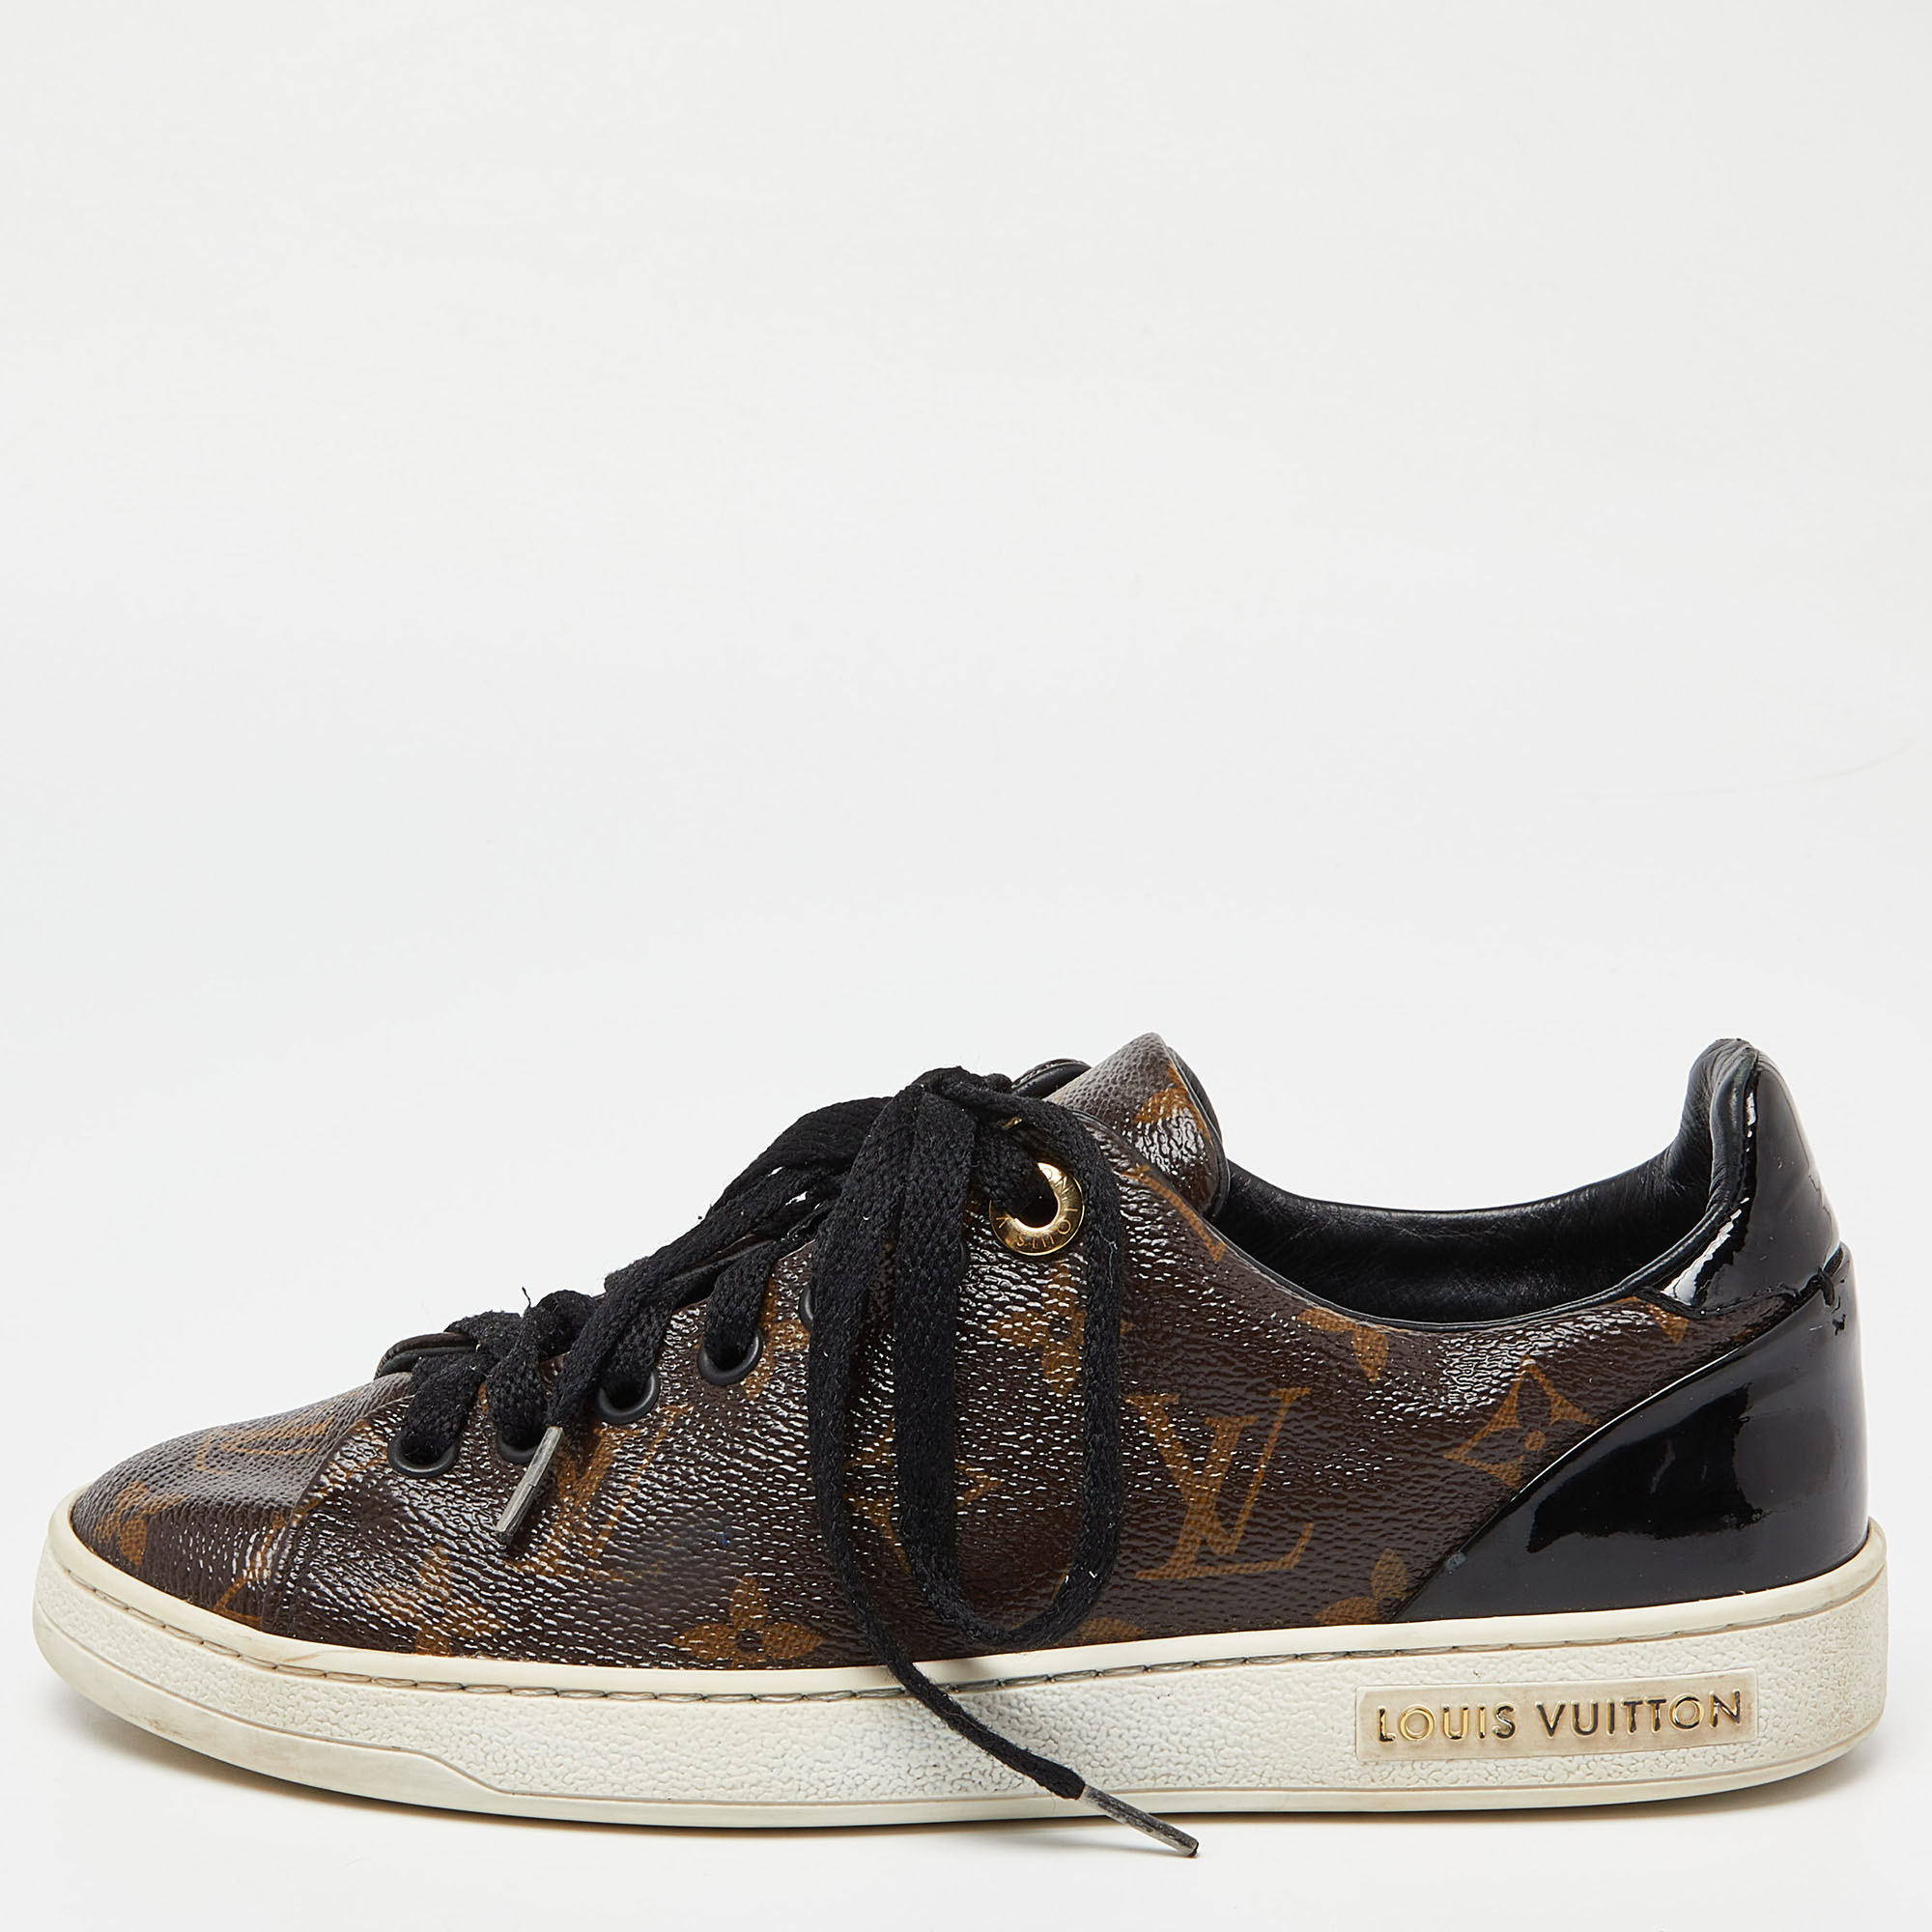 Louis vuitton brown/black monogram canvas and patent leather frontrow sneakers size 36